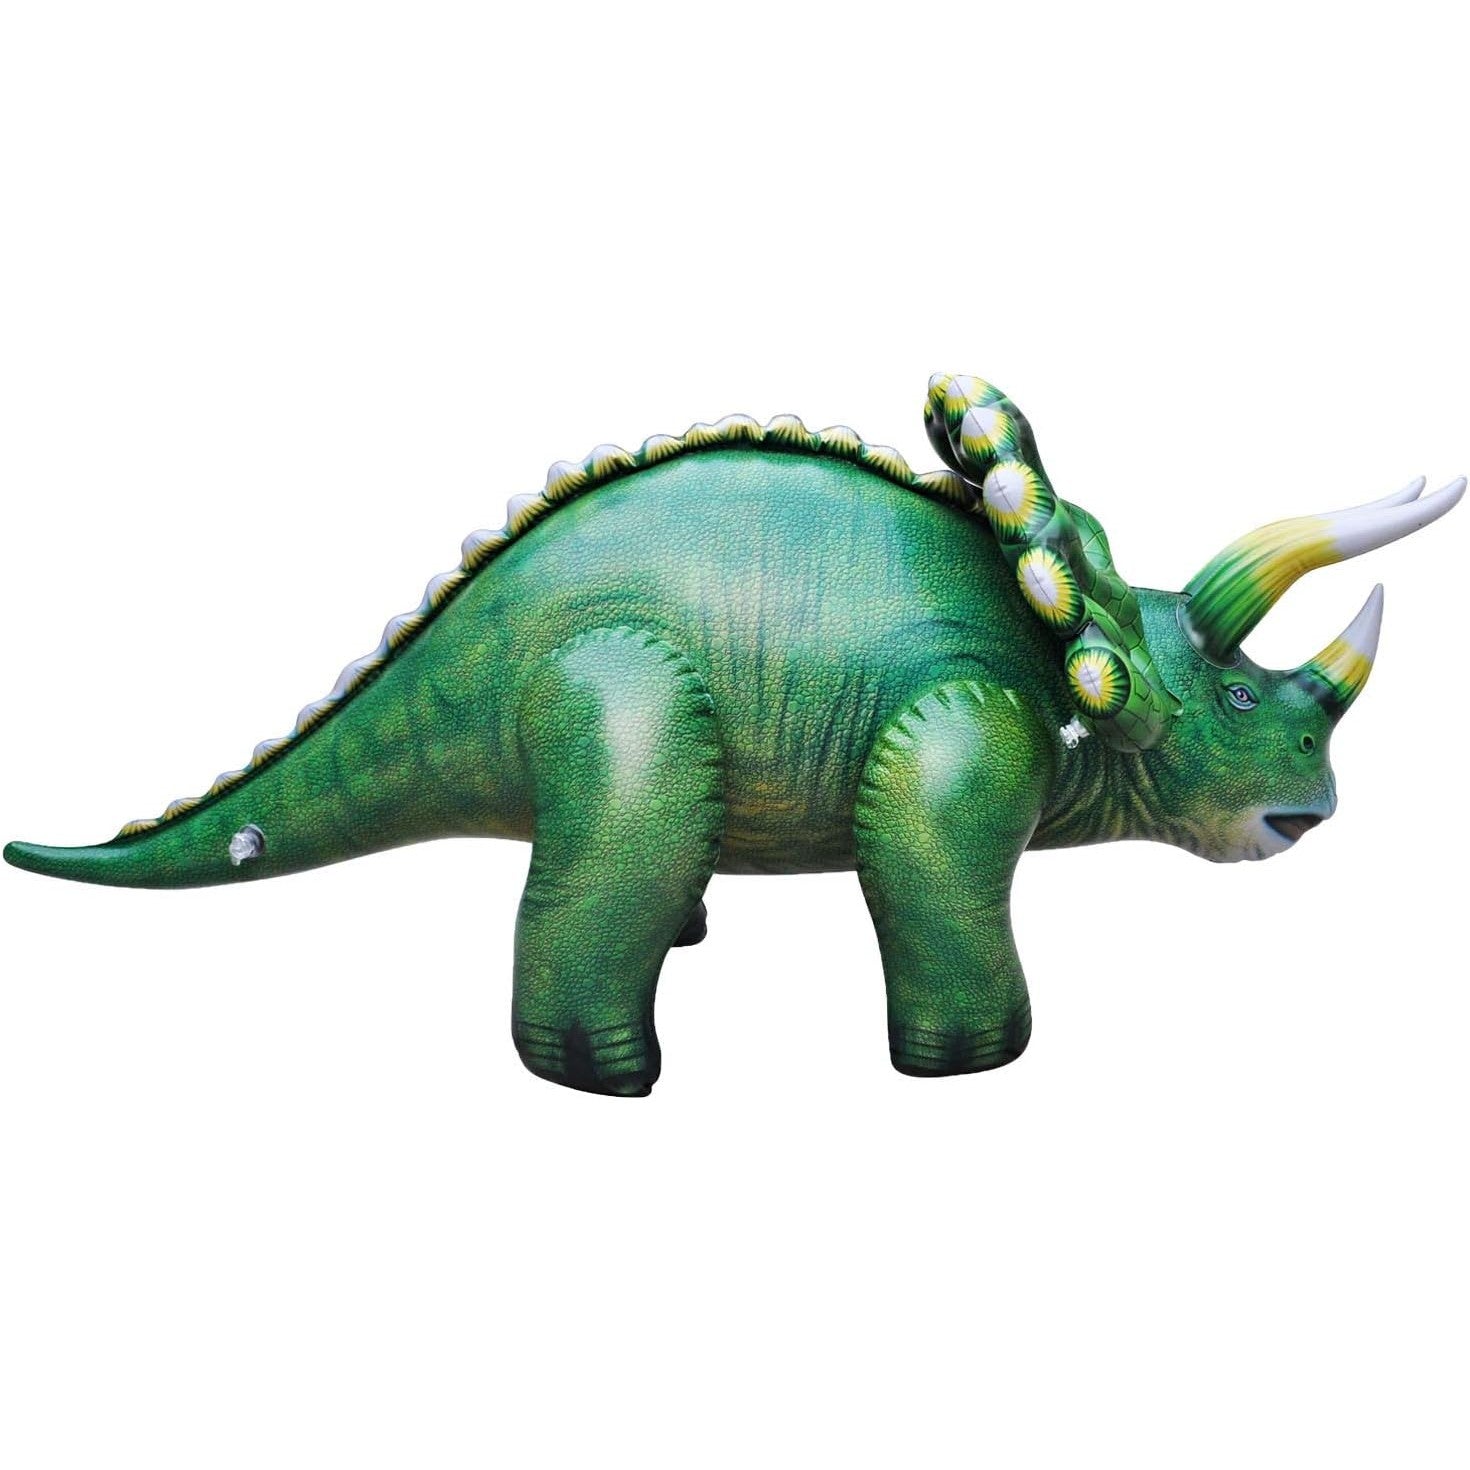 A giant green inflatable Triceratops dinosaur.